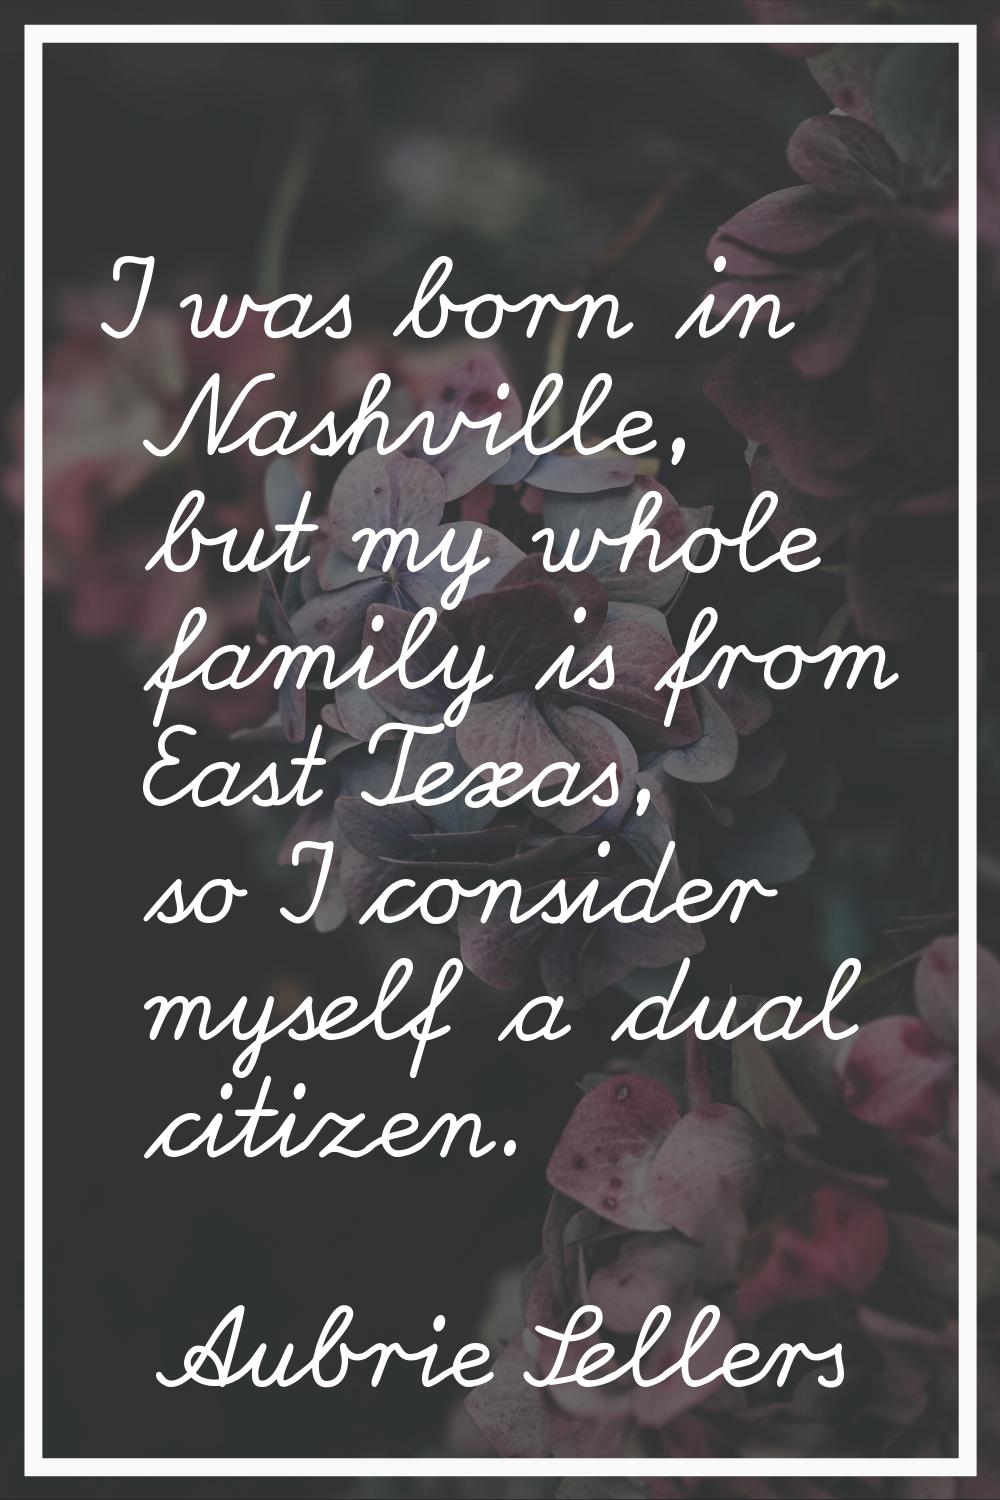 I was born in Nashville, but my whole family is from East Texas, so I consider myself a dual citize